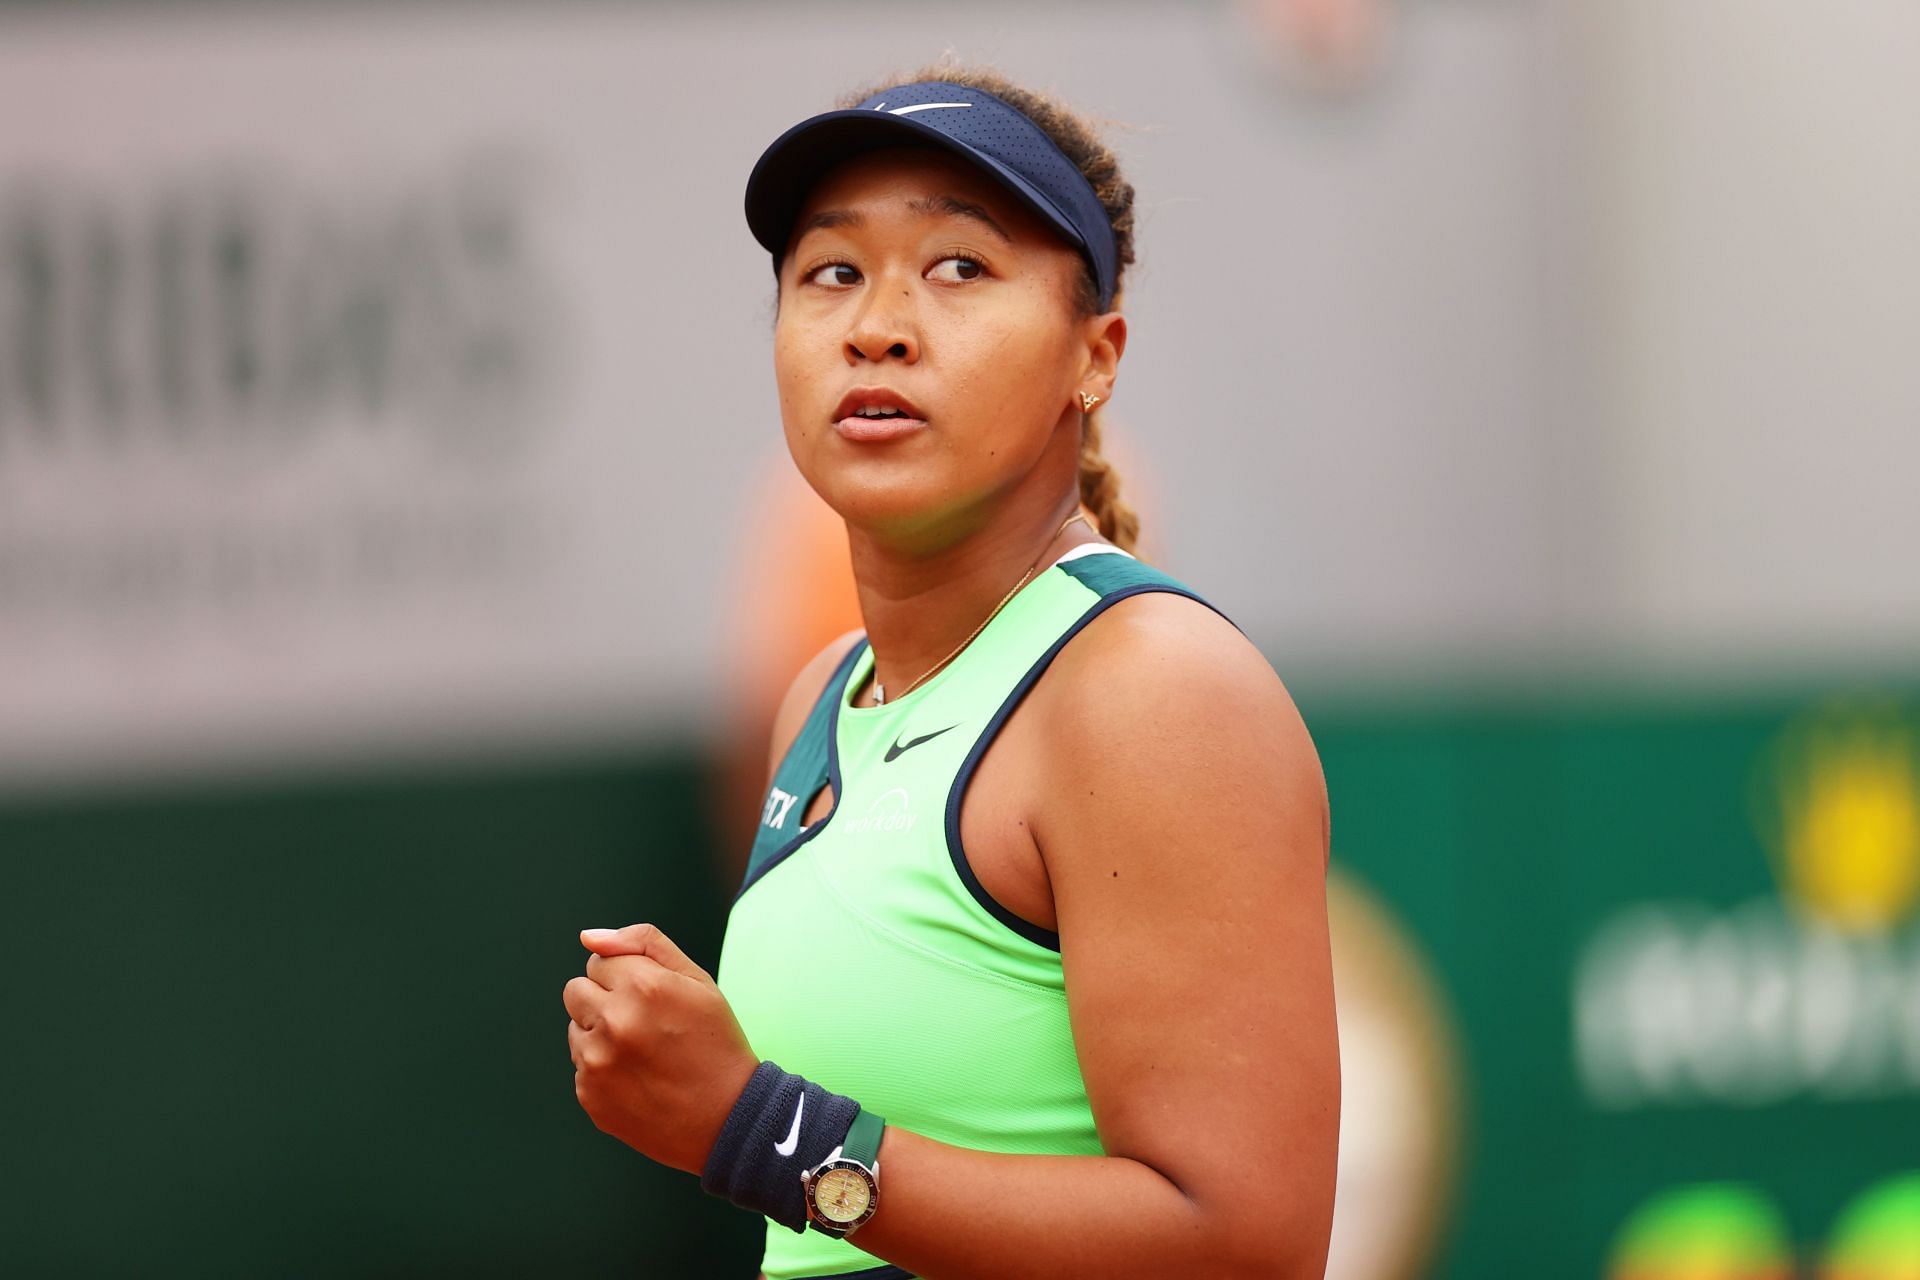 Naomi Osaka to play for the first time since French Open.